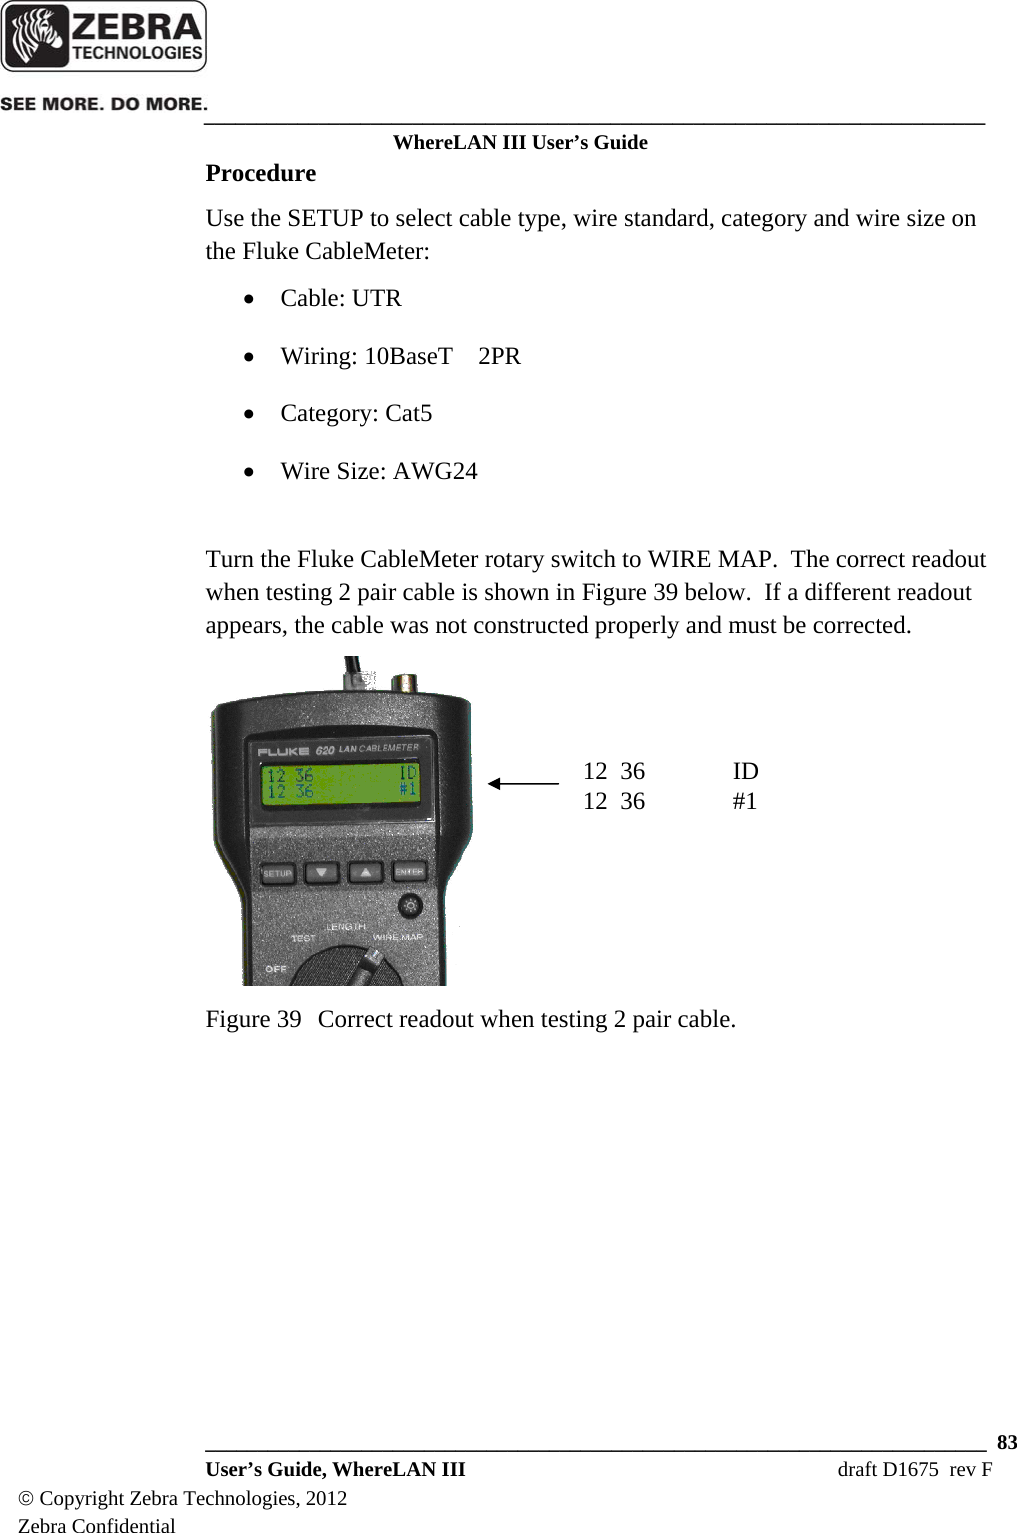    ___________________________________________________________________________ WhereLAN III User’s Guide  ___________________________________________________________________________  83  User’s Guide, WhereLAN III  draft D1675  rev F © Copyright Zebra Technologies, 2012 Zebra Confidential Procedure Use the SETUP to select cable type, wire standard, category and wire size on the Fluke CableMeter: • Cable: UTR • Wiring: 10BaseT    2PR • Category: Cat5 • Wire Size: AWG24  Turn the Fluke CableMeter rotary switch to WIRE MAP.  The correct readout when testing 2 pair cable is shown in Figure 39 below.  If a different readout appears, the cable was not constructed properly and must be corrected.    Figure 39  Correct readout when testing 2 pair cable.       12  36    ID 12  36    #1 